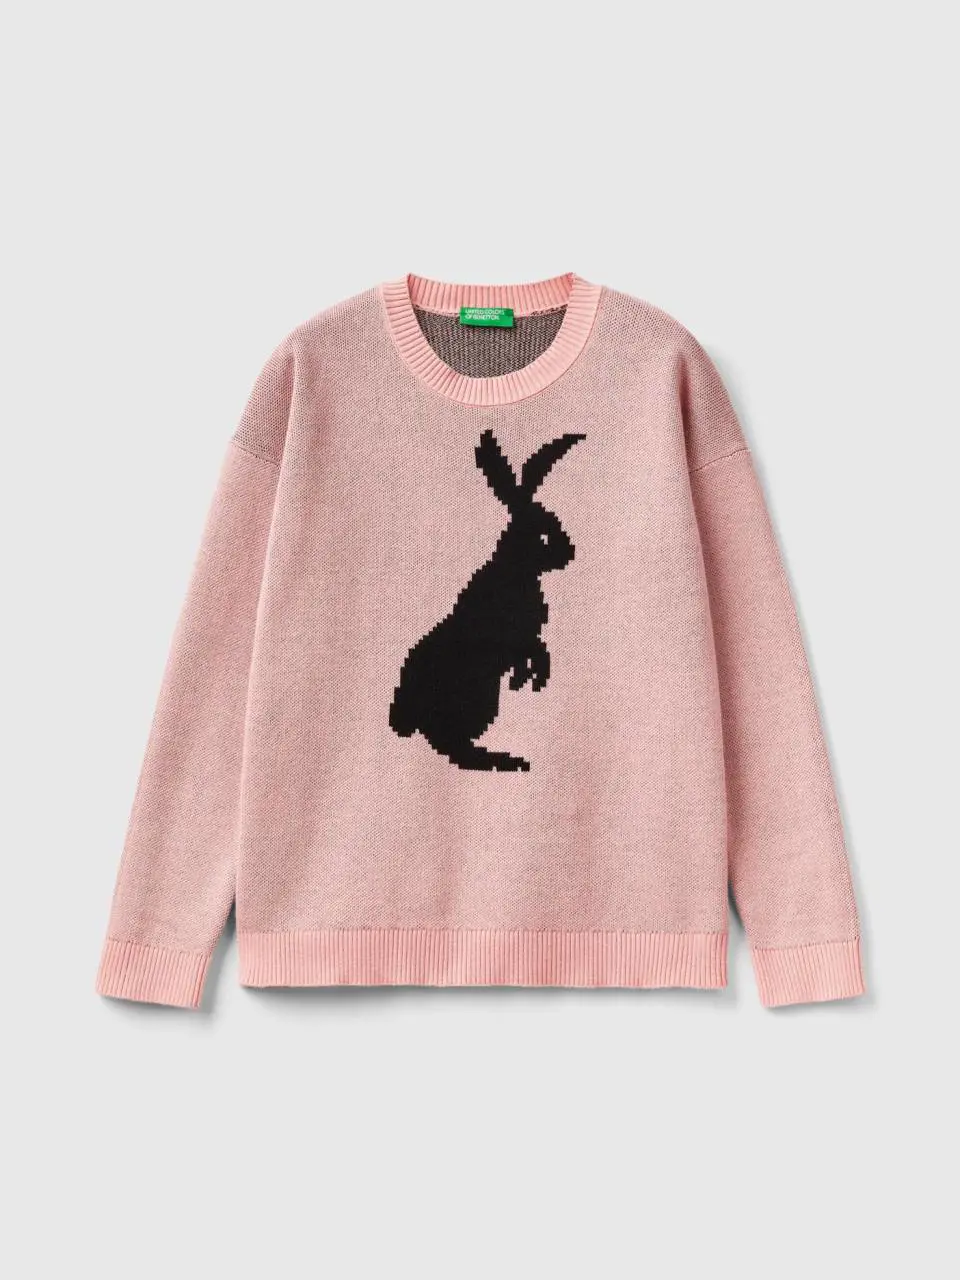 Benetton sweater with bunny design. 1